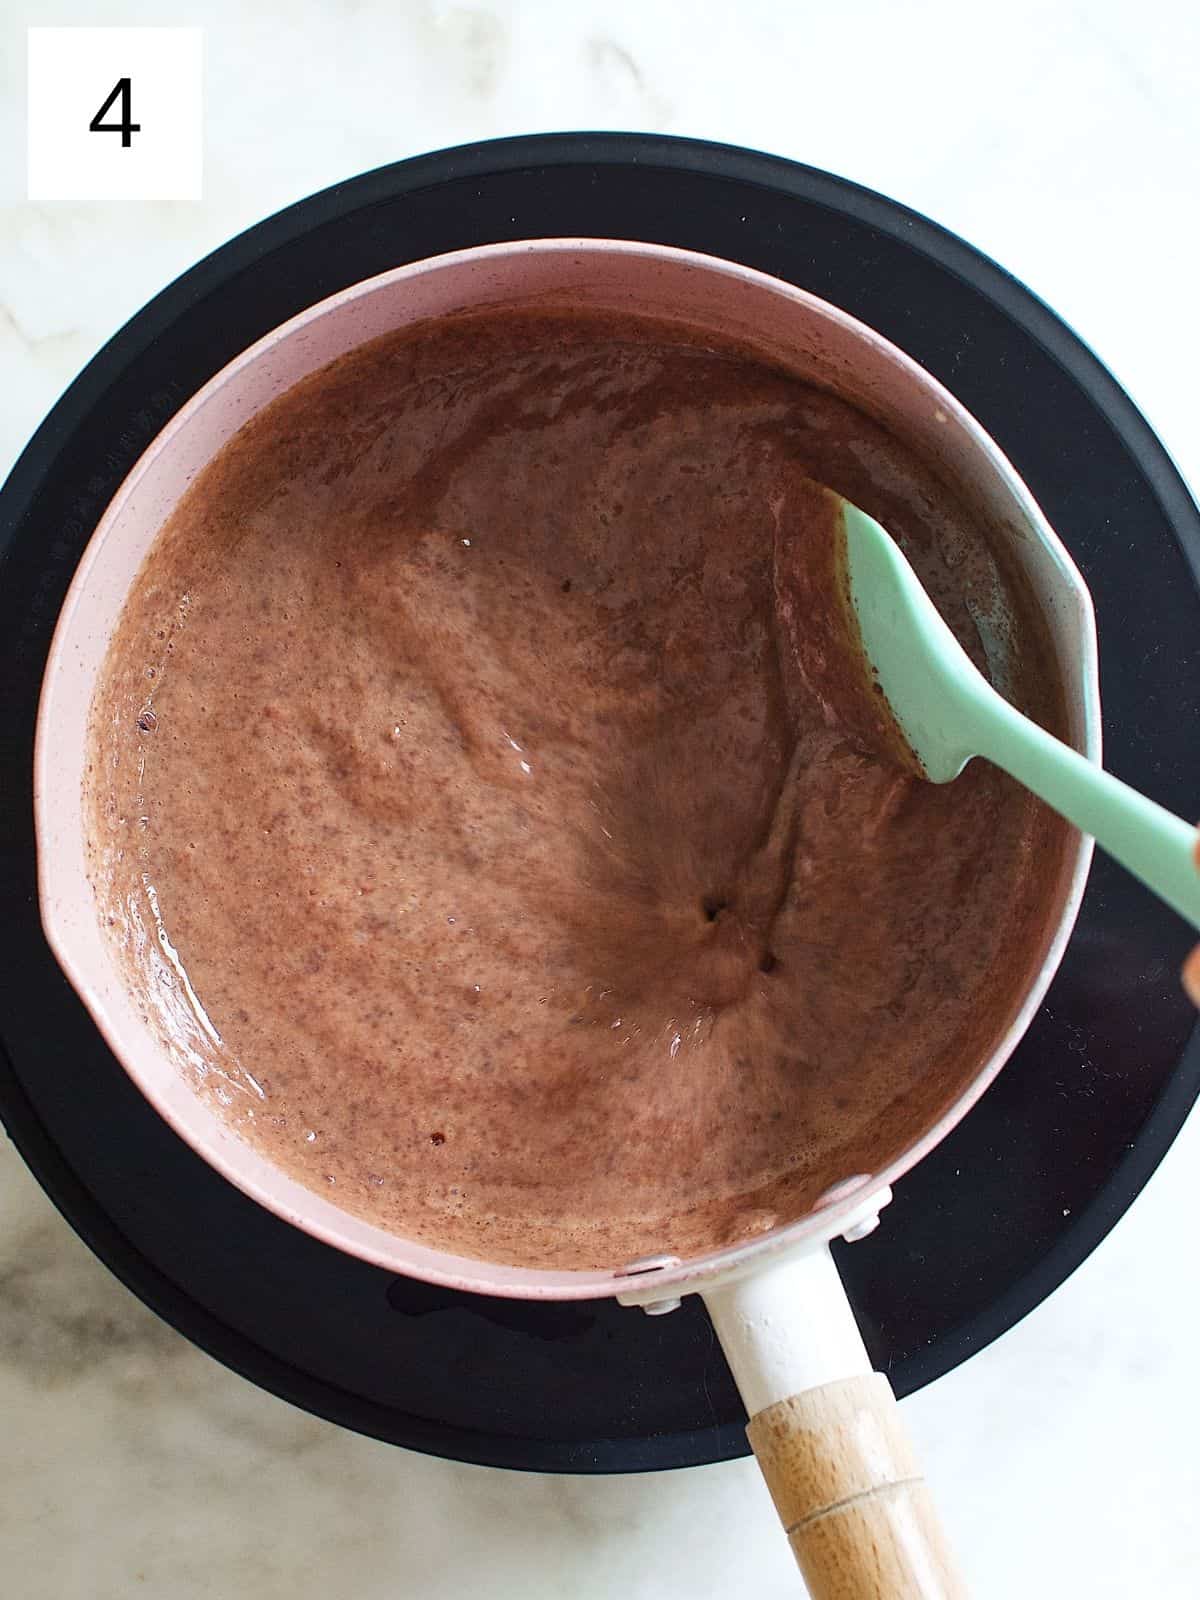 thickened mixture of butter, sweetened condensed milk, and cocoa powder in a saucepan.